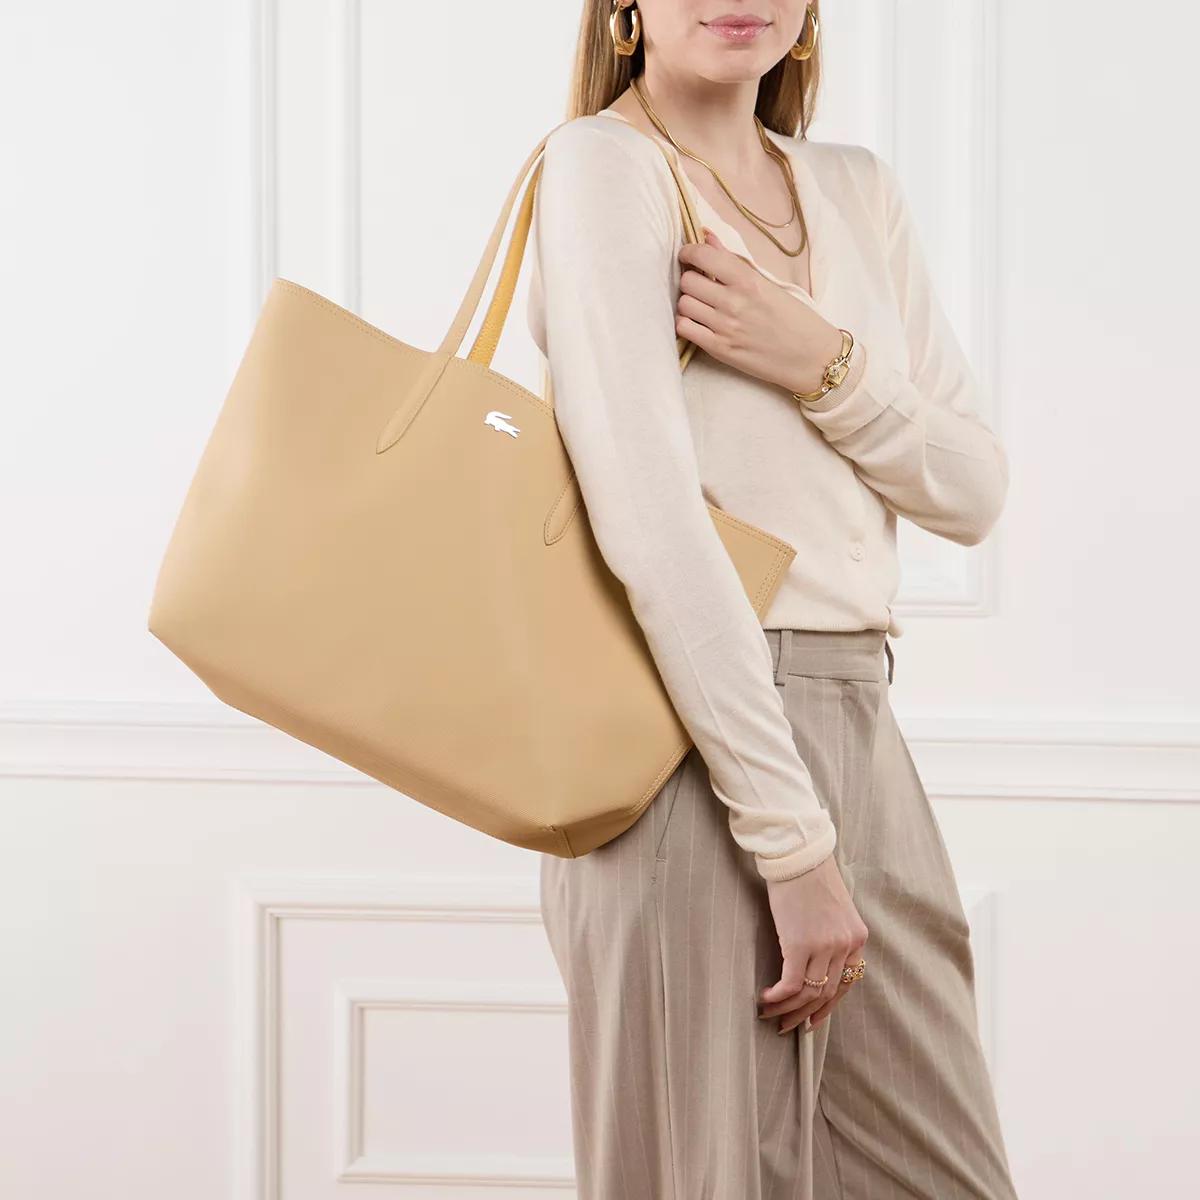 Lacoste Shoppers Anna Shopping Bag in beige